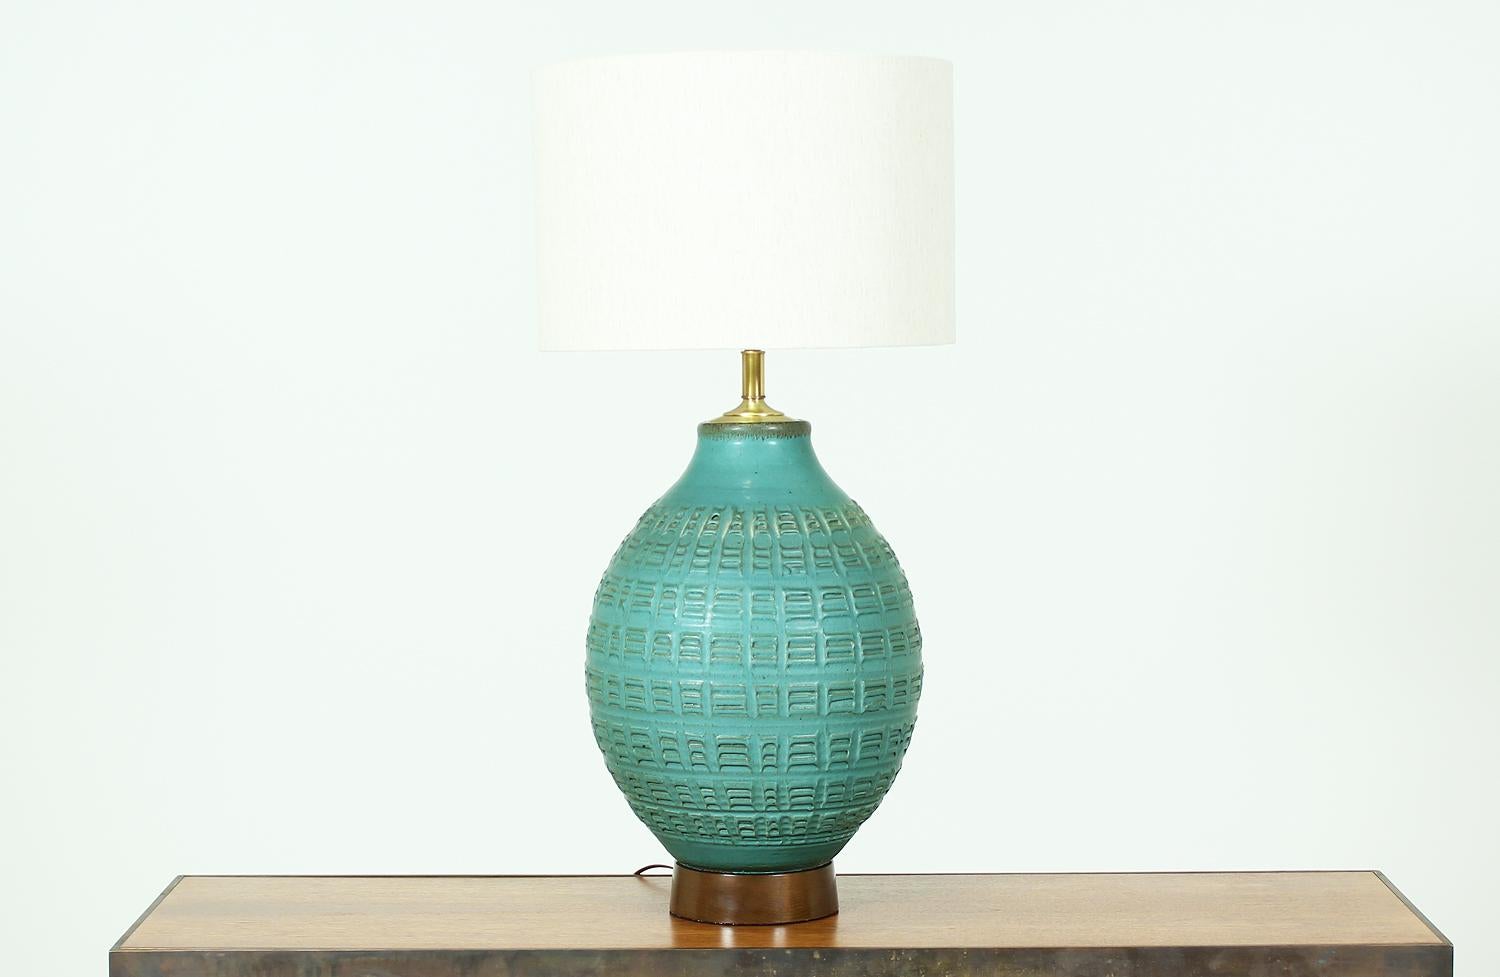 Large ceramic table lamp designed by Bob Kinzie for Affiliated Craftsmen in the United States circa 1960s. The ceramic body features a textured green finish representative of Kinzies design aesthetic and sits on a solid walnut base for a wonderful